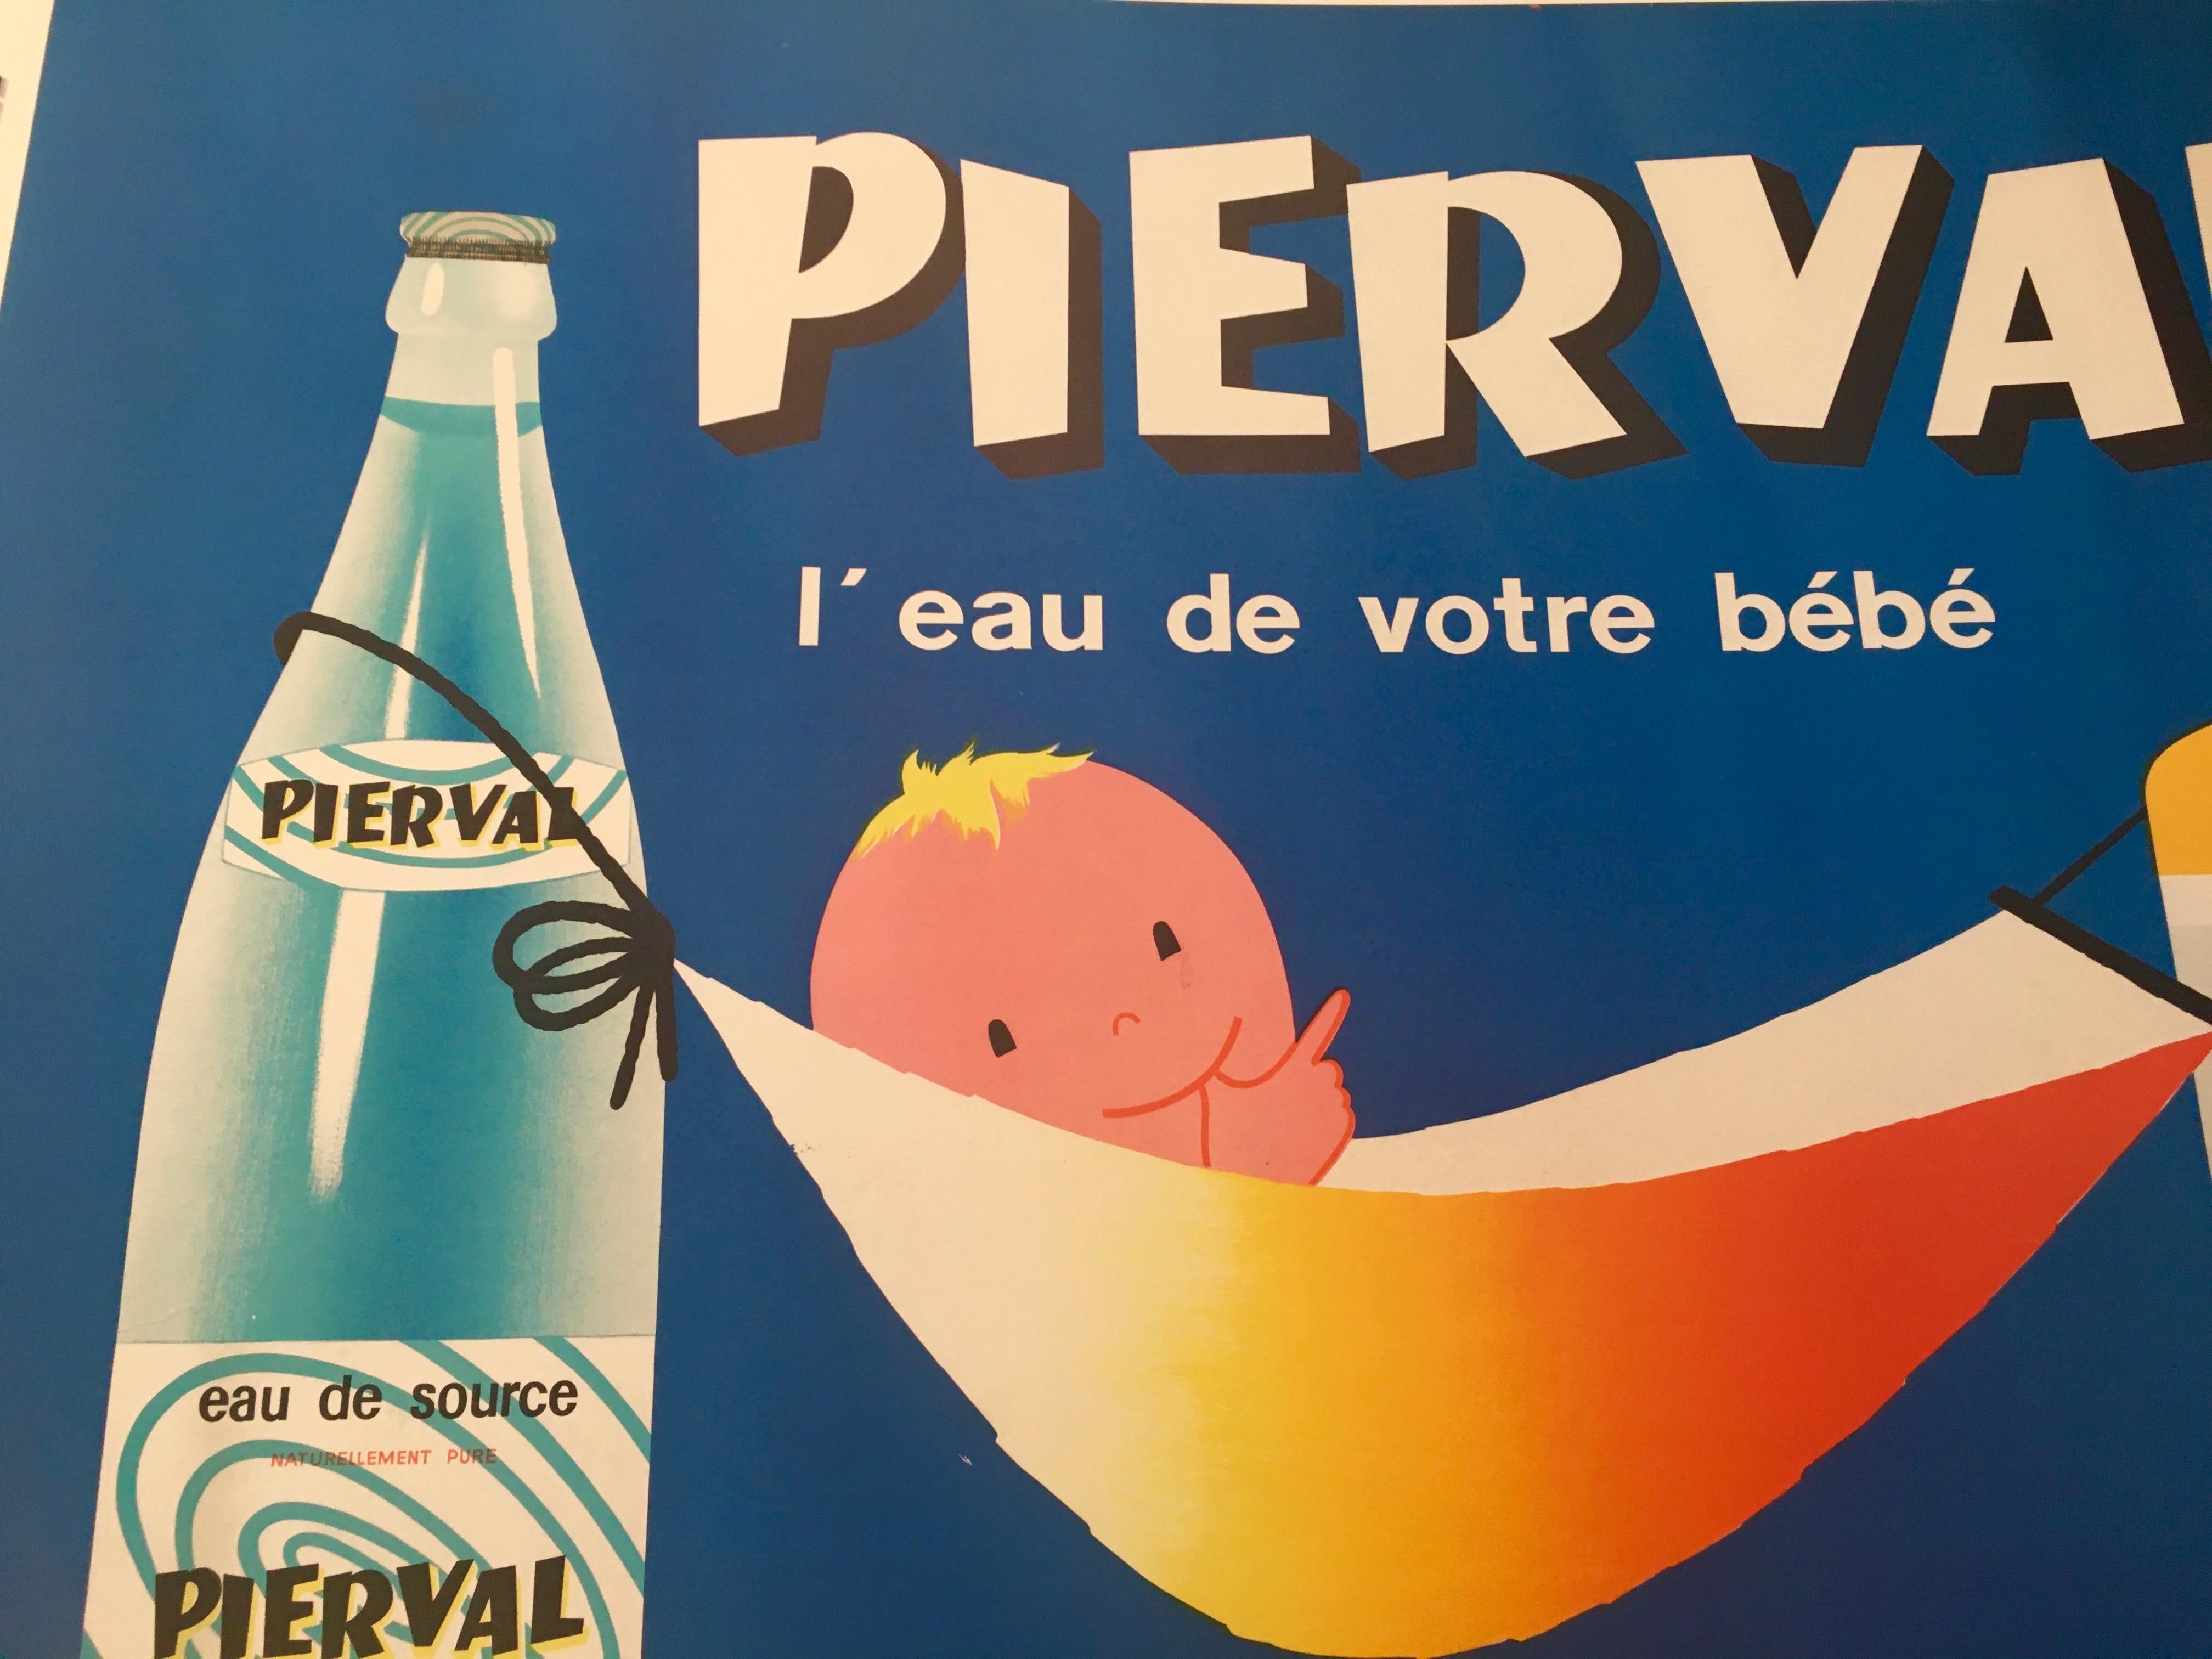 International Style French Mineral Water Original Vintage Advertising Poster, 'Pierval' by J. Auriac